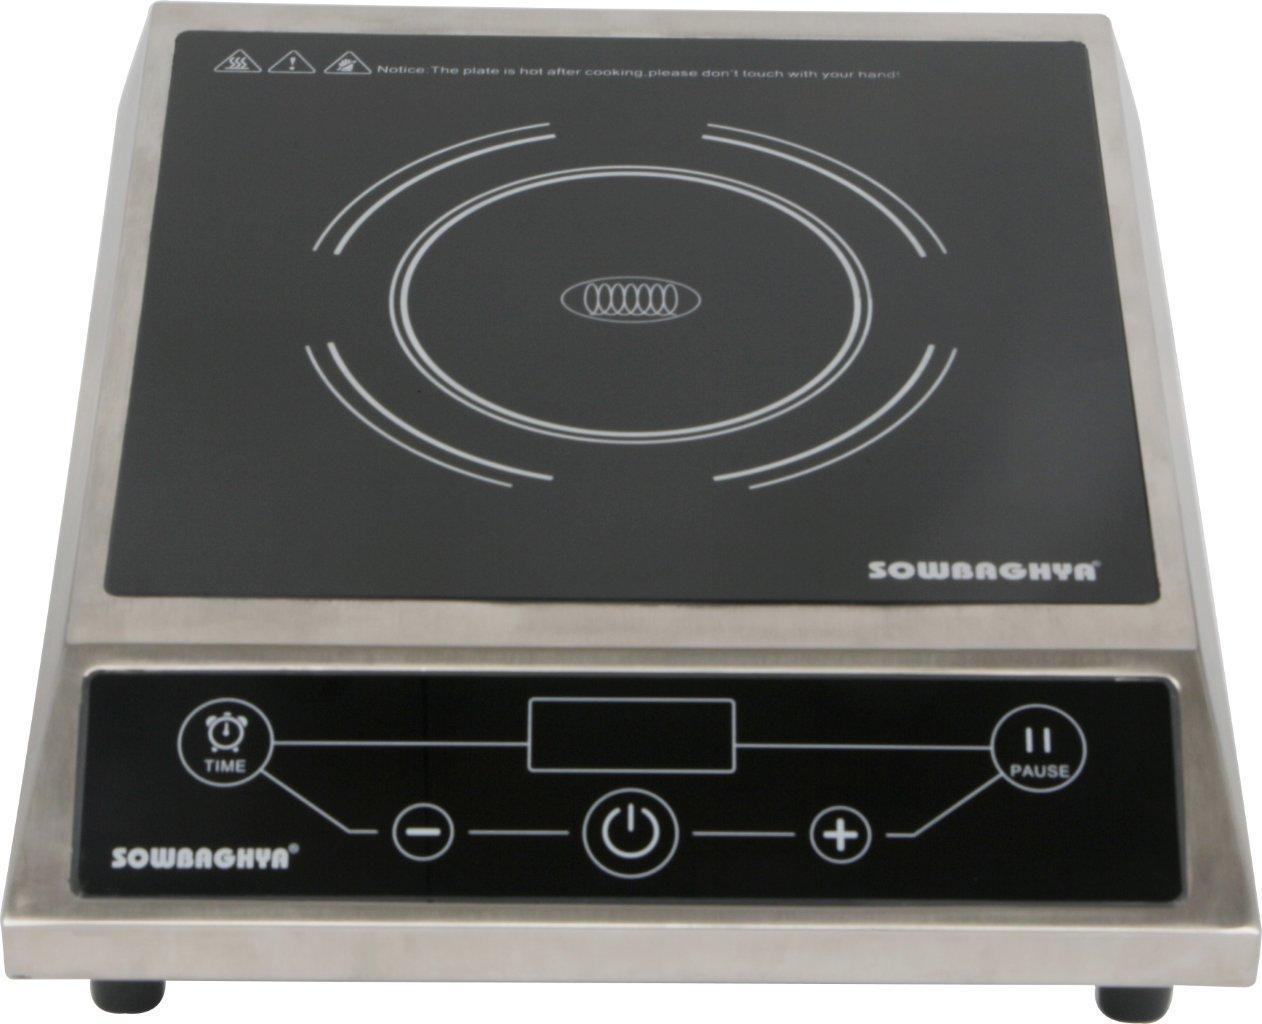 Commercial Table Top Induction stove - 3500W (Touch Type) - SOWBAGHYA